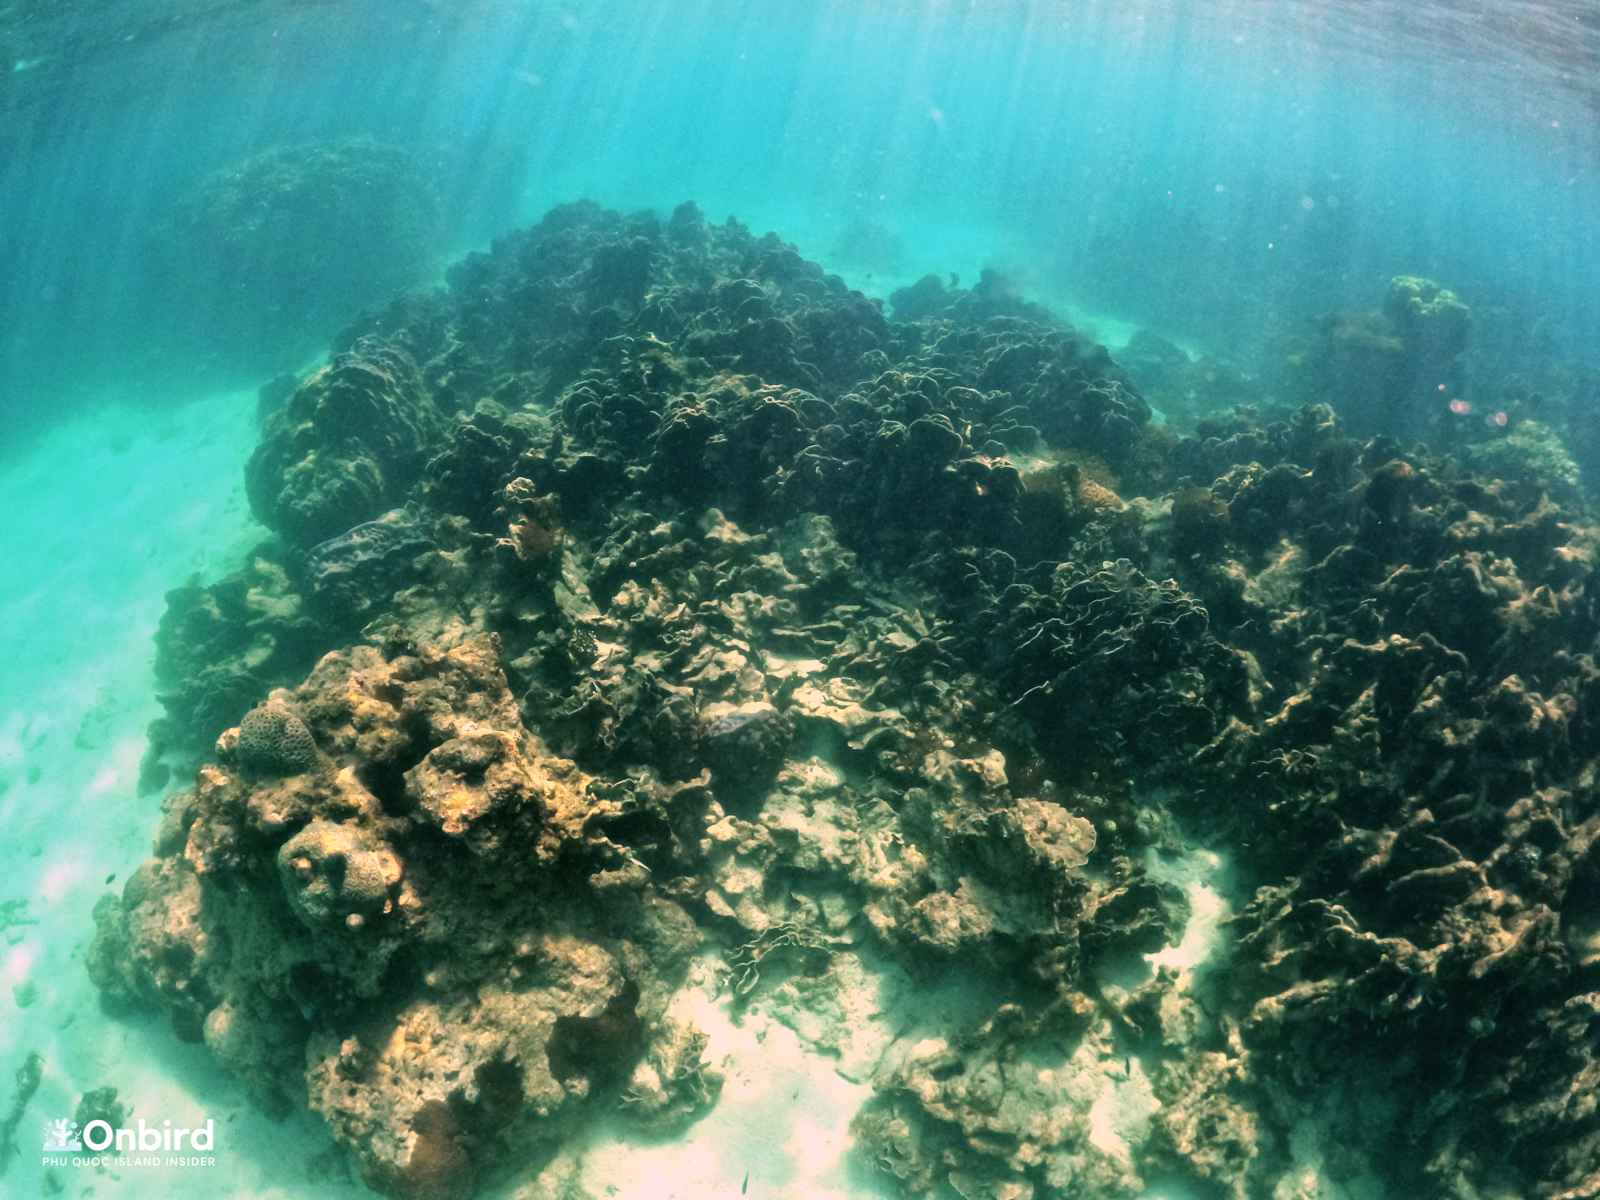 Dead corals in Dam Ngang Island, Phu Quoc, Vietnam